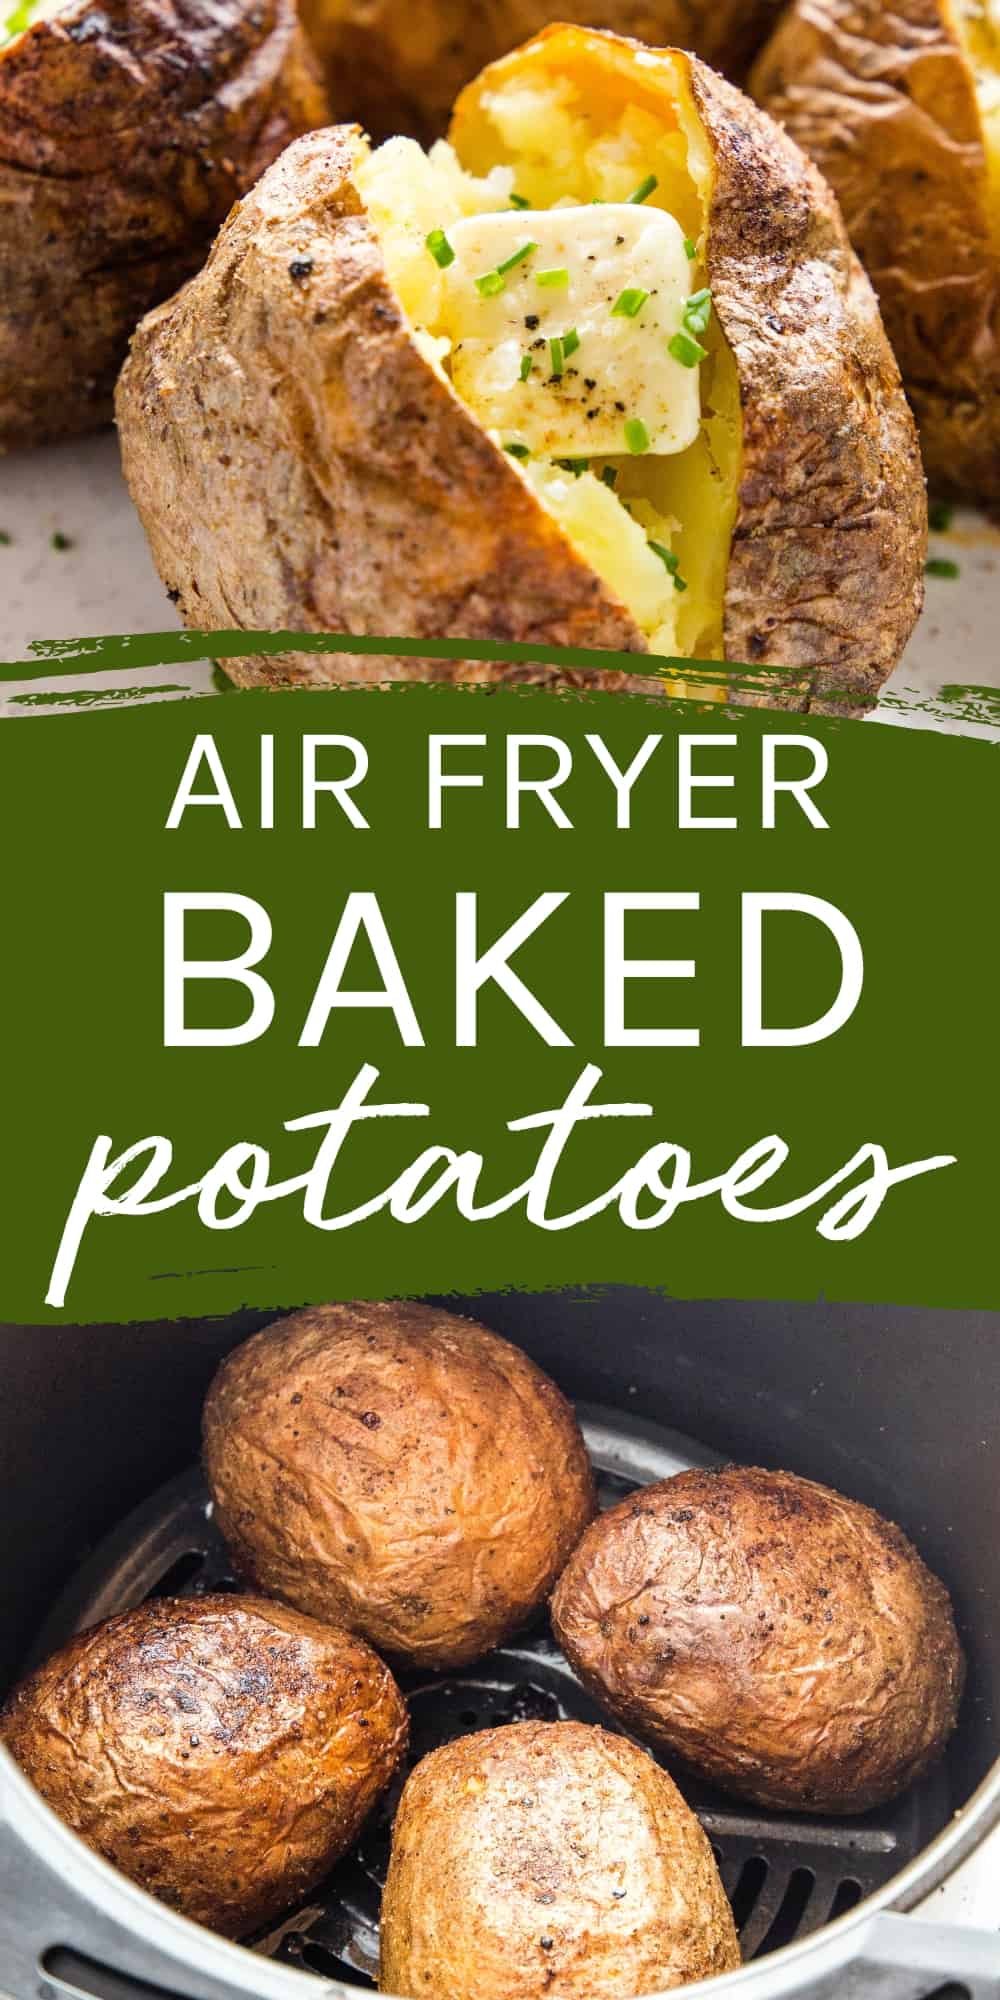 These Air Fryer Baked Potatoes are the BEST easy baked potatoes - perfectly crispy skin and a fluffy interior. Ready in about 30 minutes! Recipe from thebusybaker.ca! #bakedpotatoes #airfryer #airfryerrecipe #airfryersidedish #airfryerpotatoes via @busybakerblog